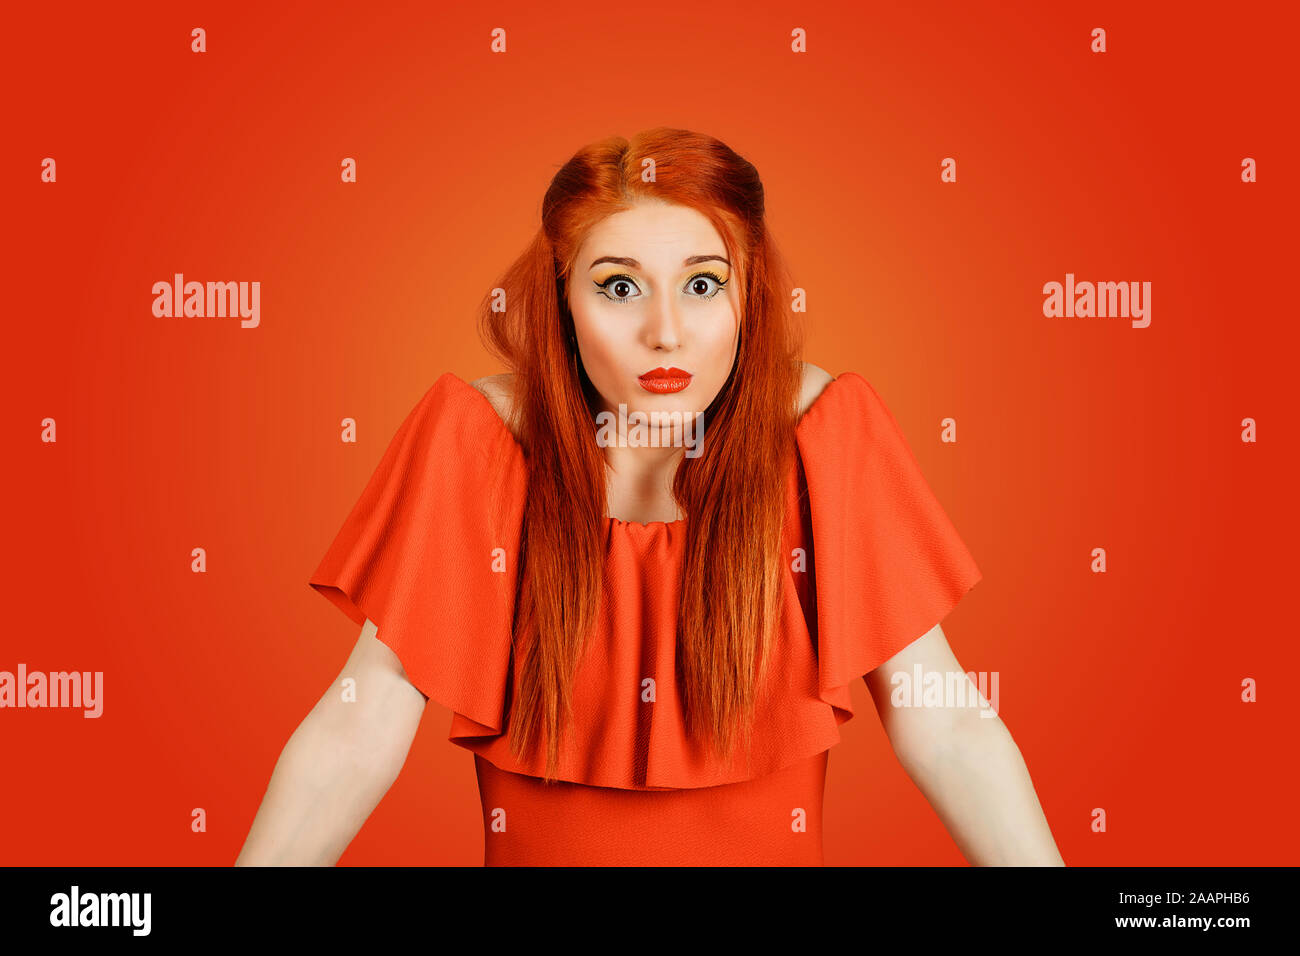 Confused guilty looking woman shrugging shoulders in confusion. Young redhead lady wearing red dress and yellow makeup isolated on Red background Stock Photo